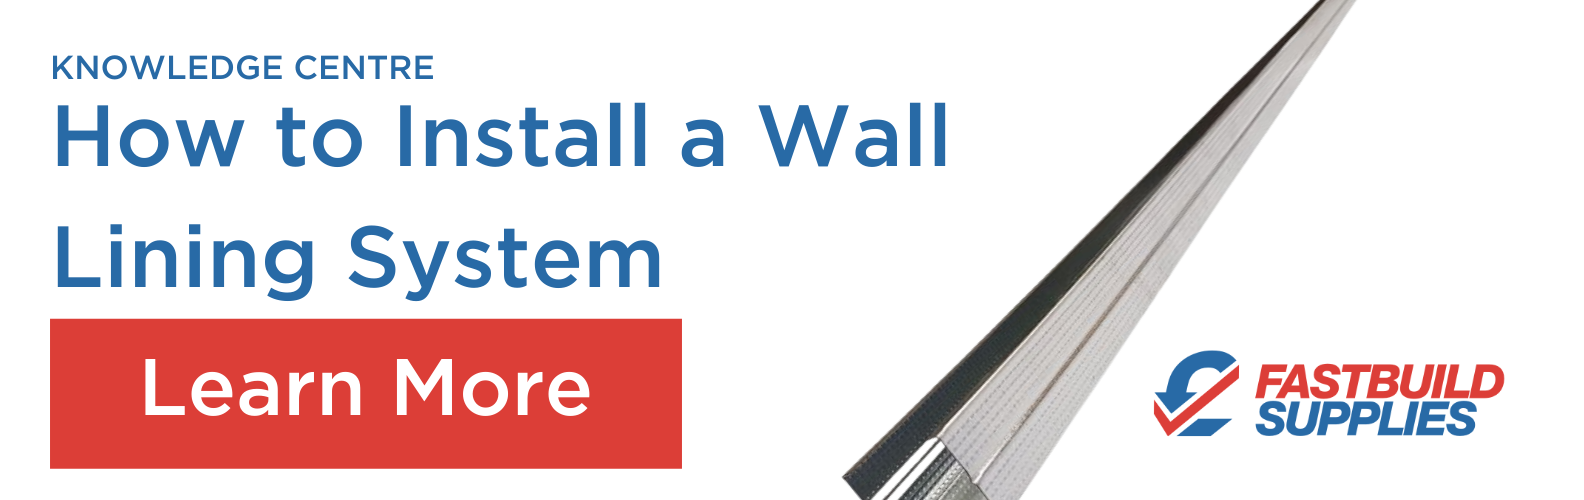 how to install a wall lining system